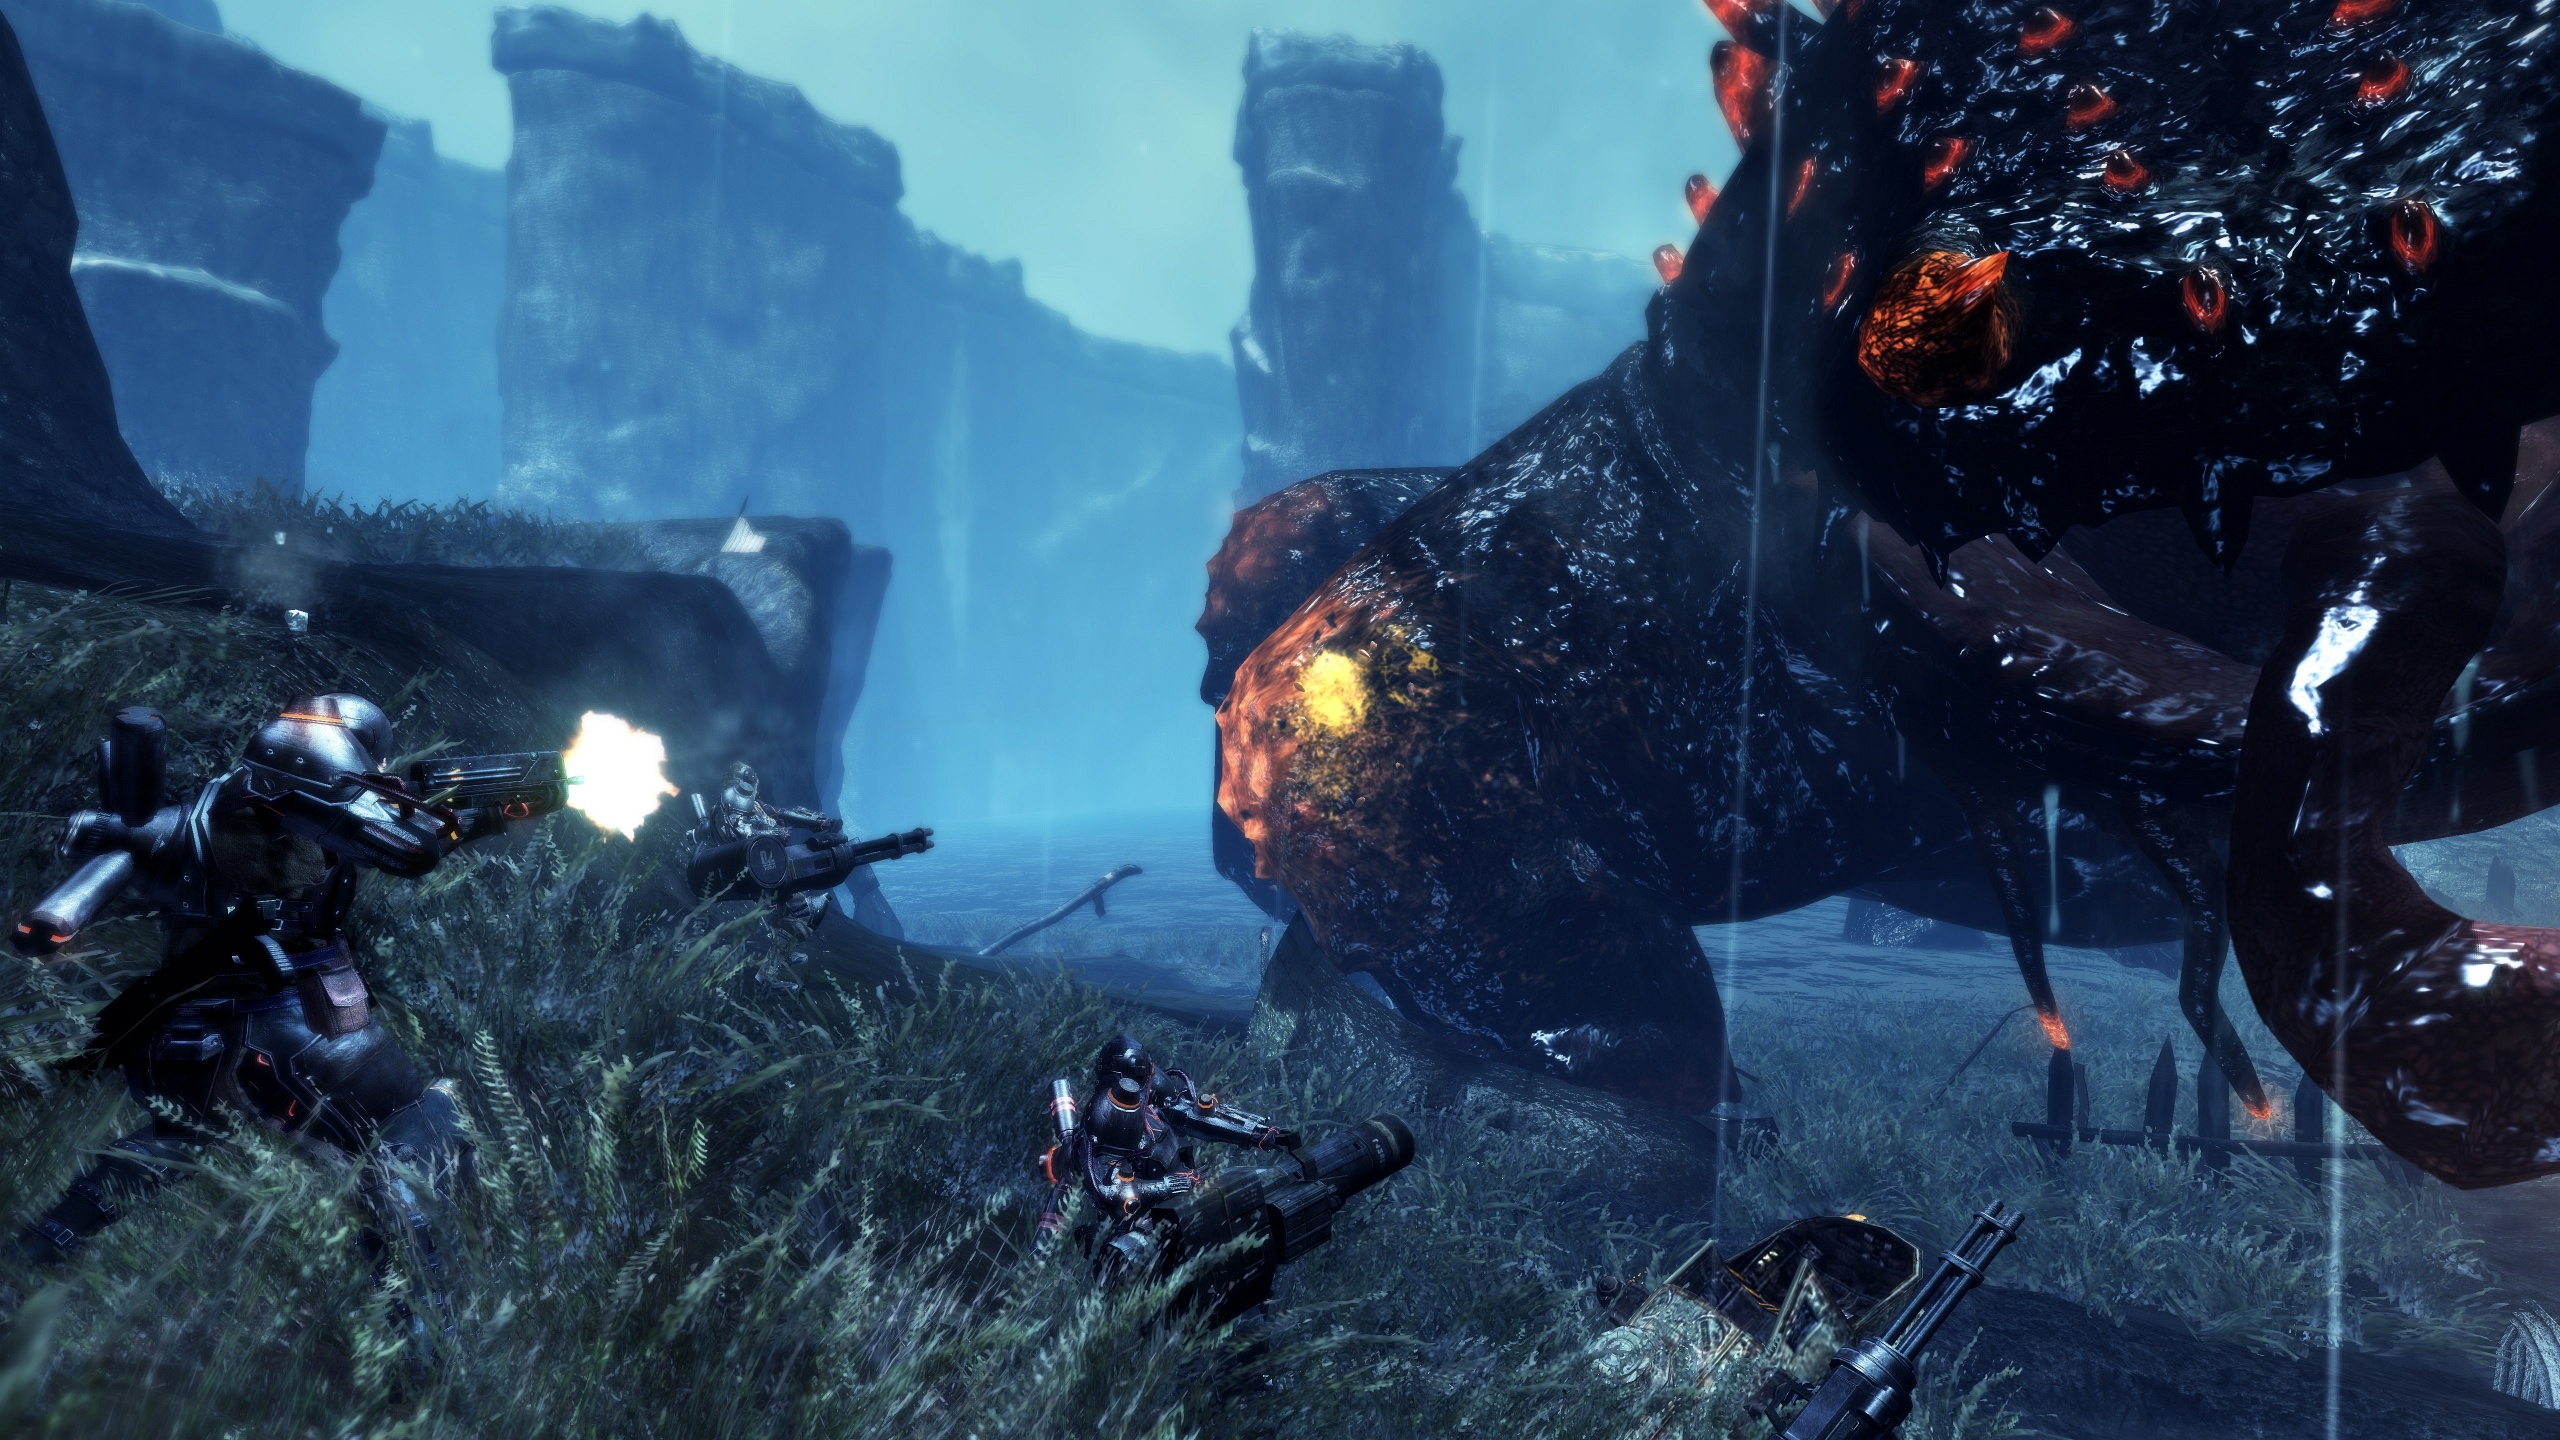 Lost the game two. Игра Lost Planet 2. Lost Planet 2 обои. Lost Planet 2 Акрид ультра g. Лост планет тим.